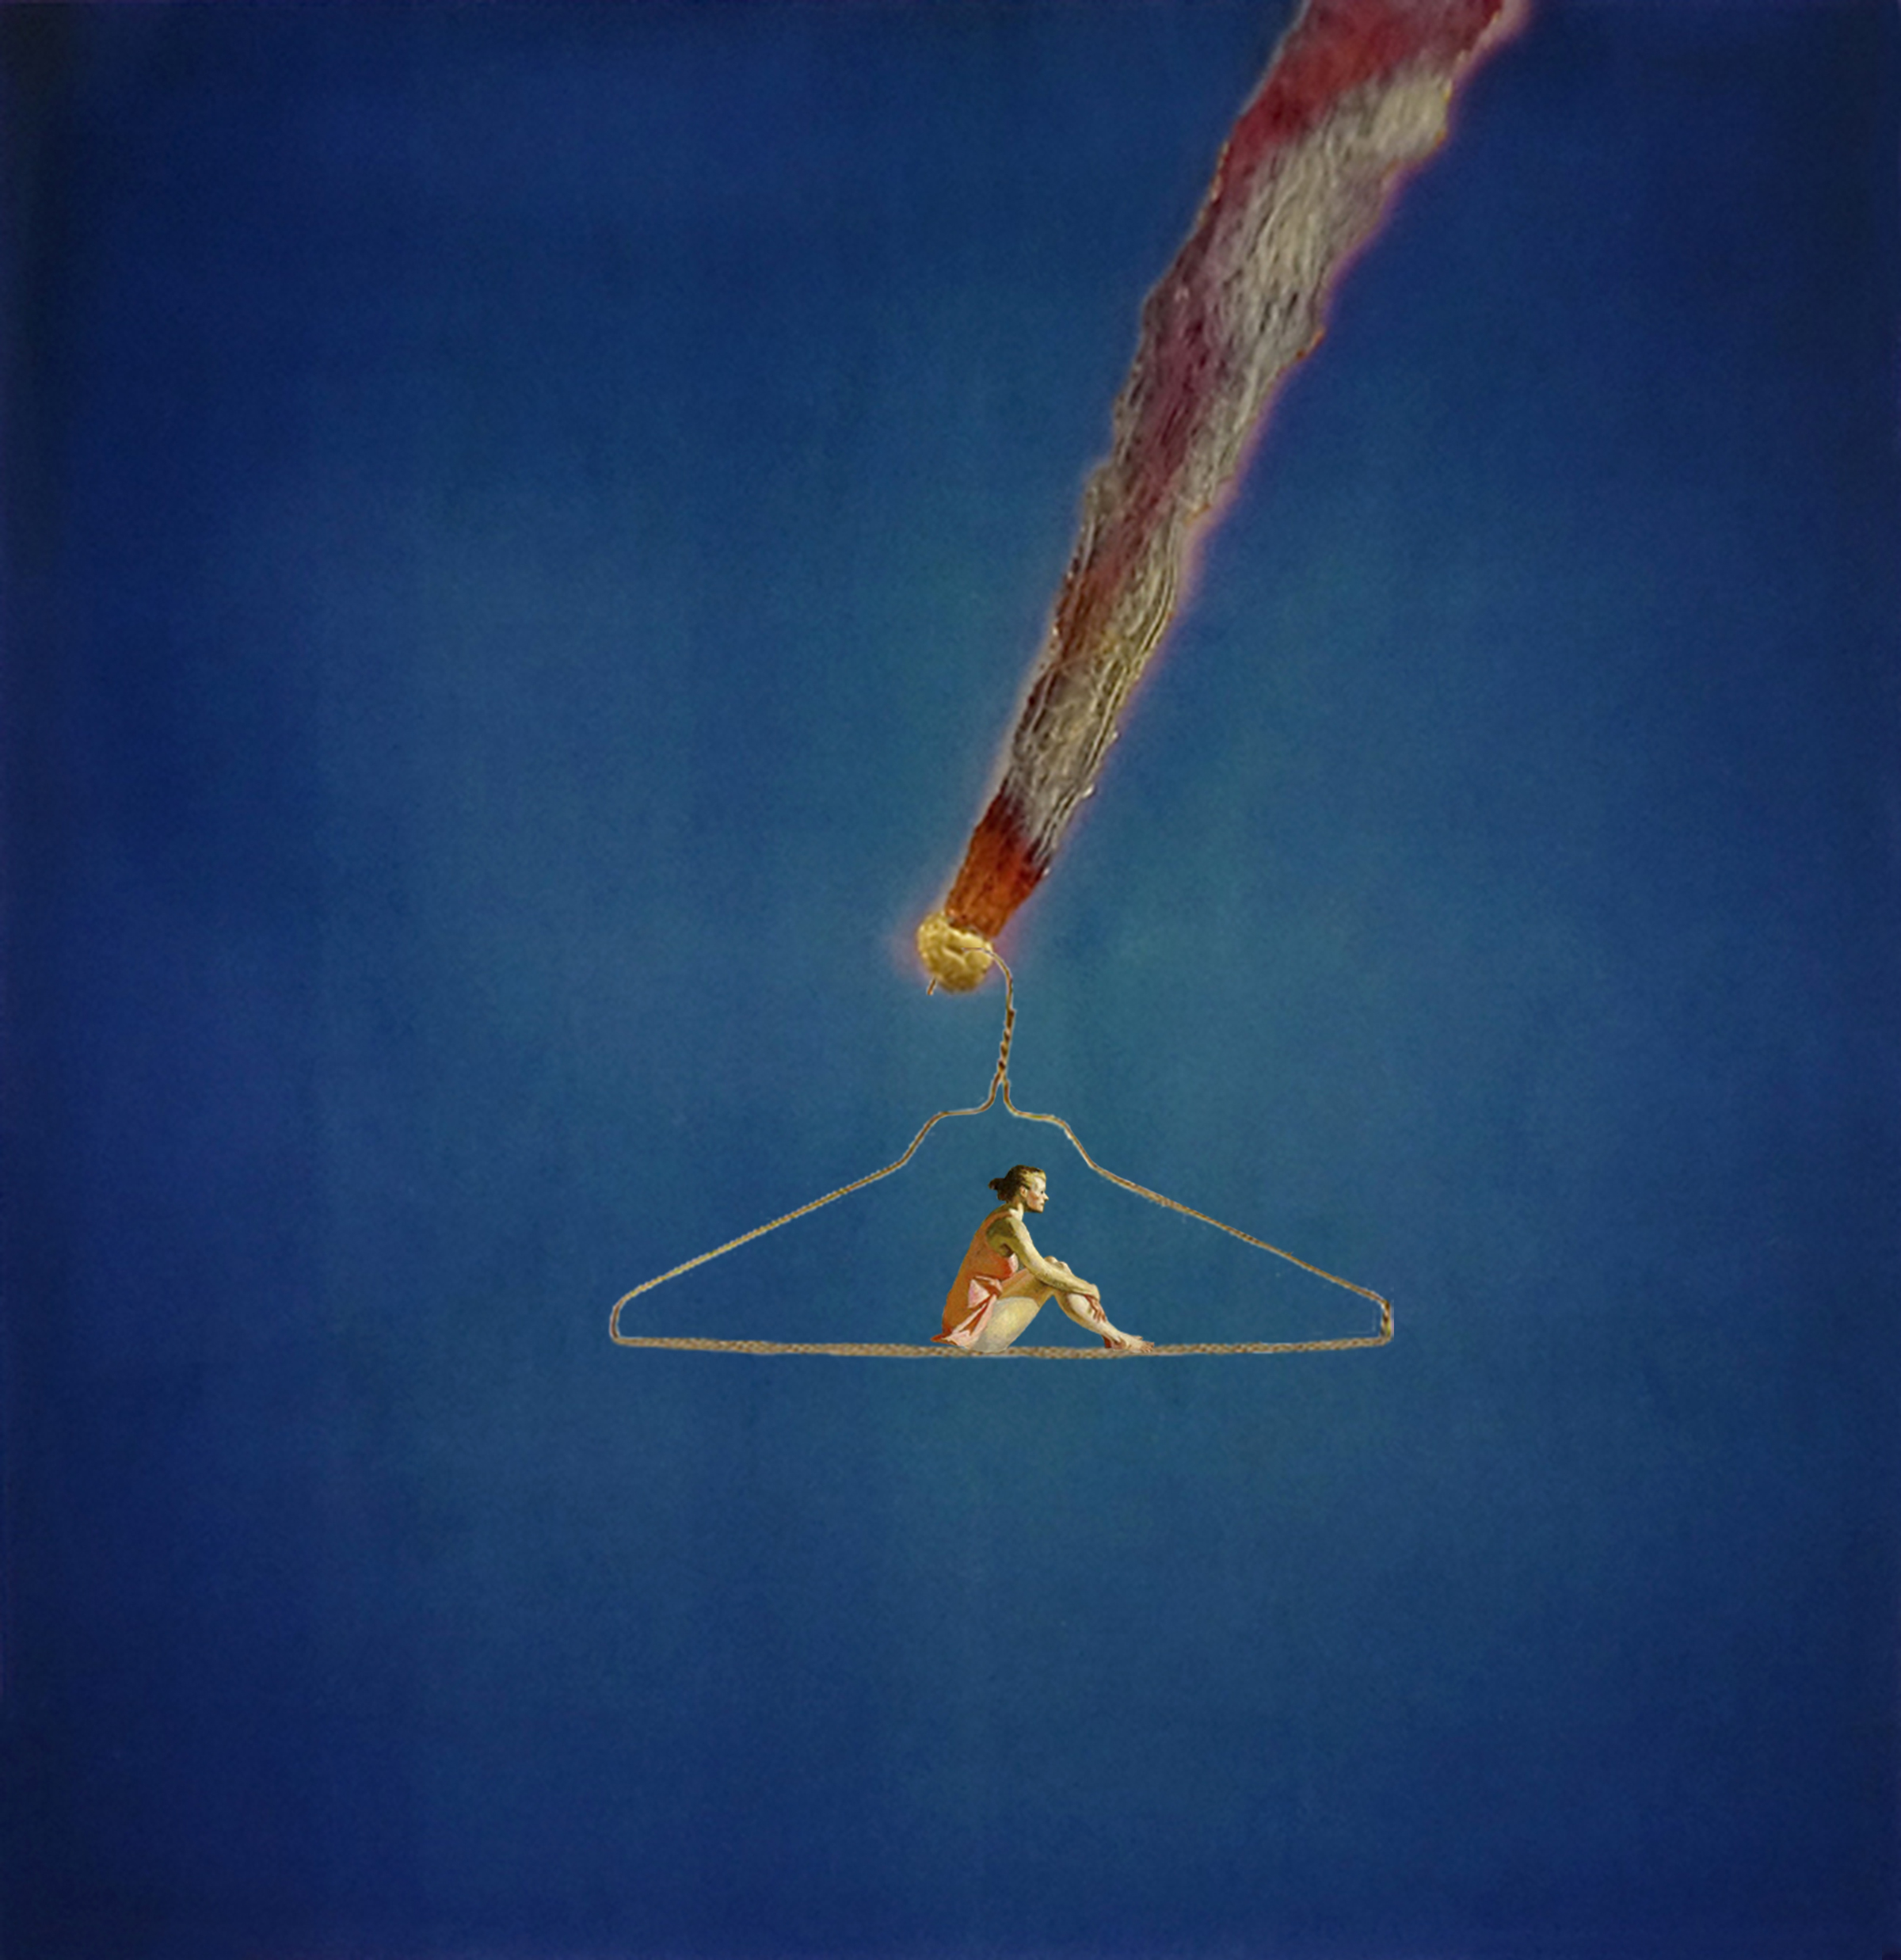 A rocket capsule falls from a cobalt blue sky to the center of the image. Hanging from its tip is a giant coat hanger with a tiny woman seated upon its base.